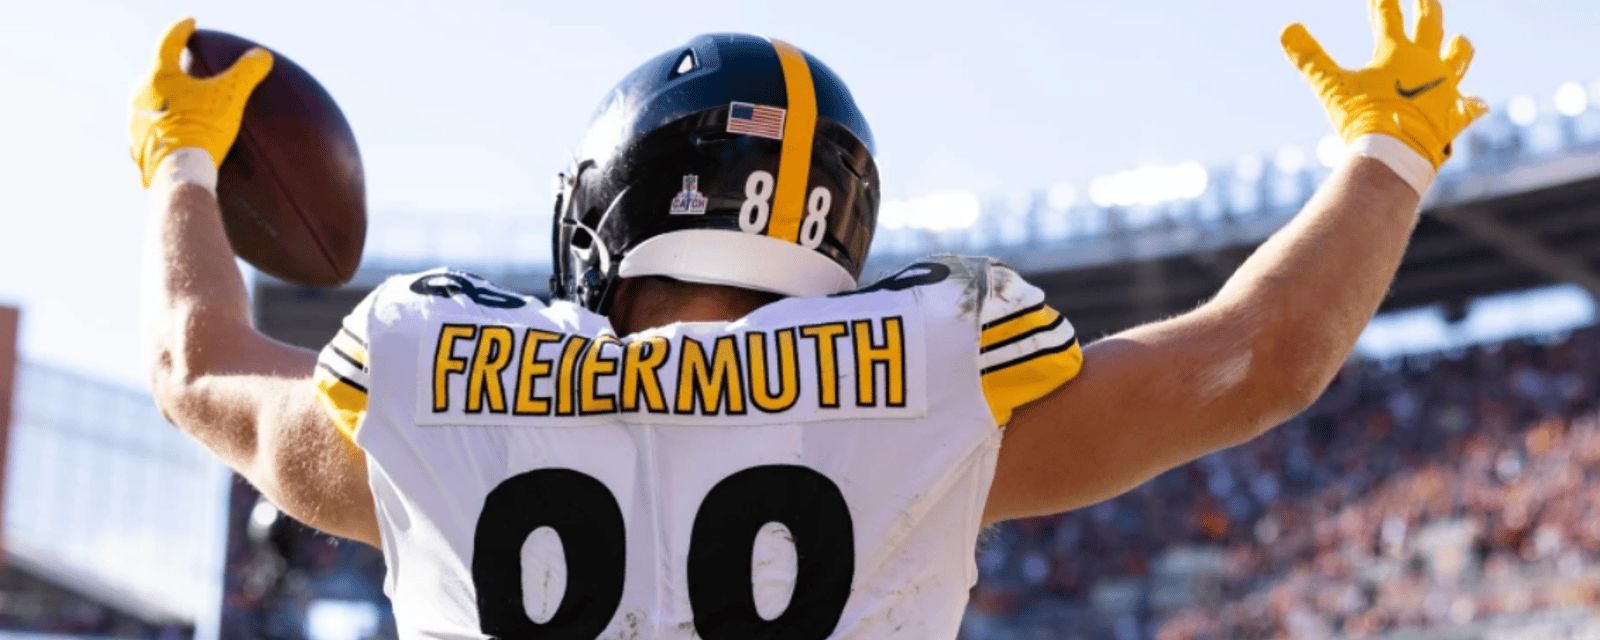 Pat Freiermuth has a message for Steelers fans! 